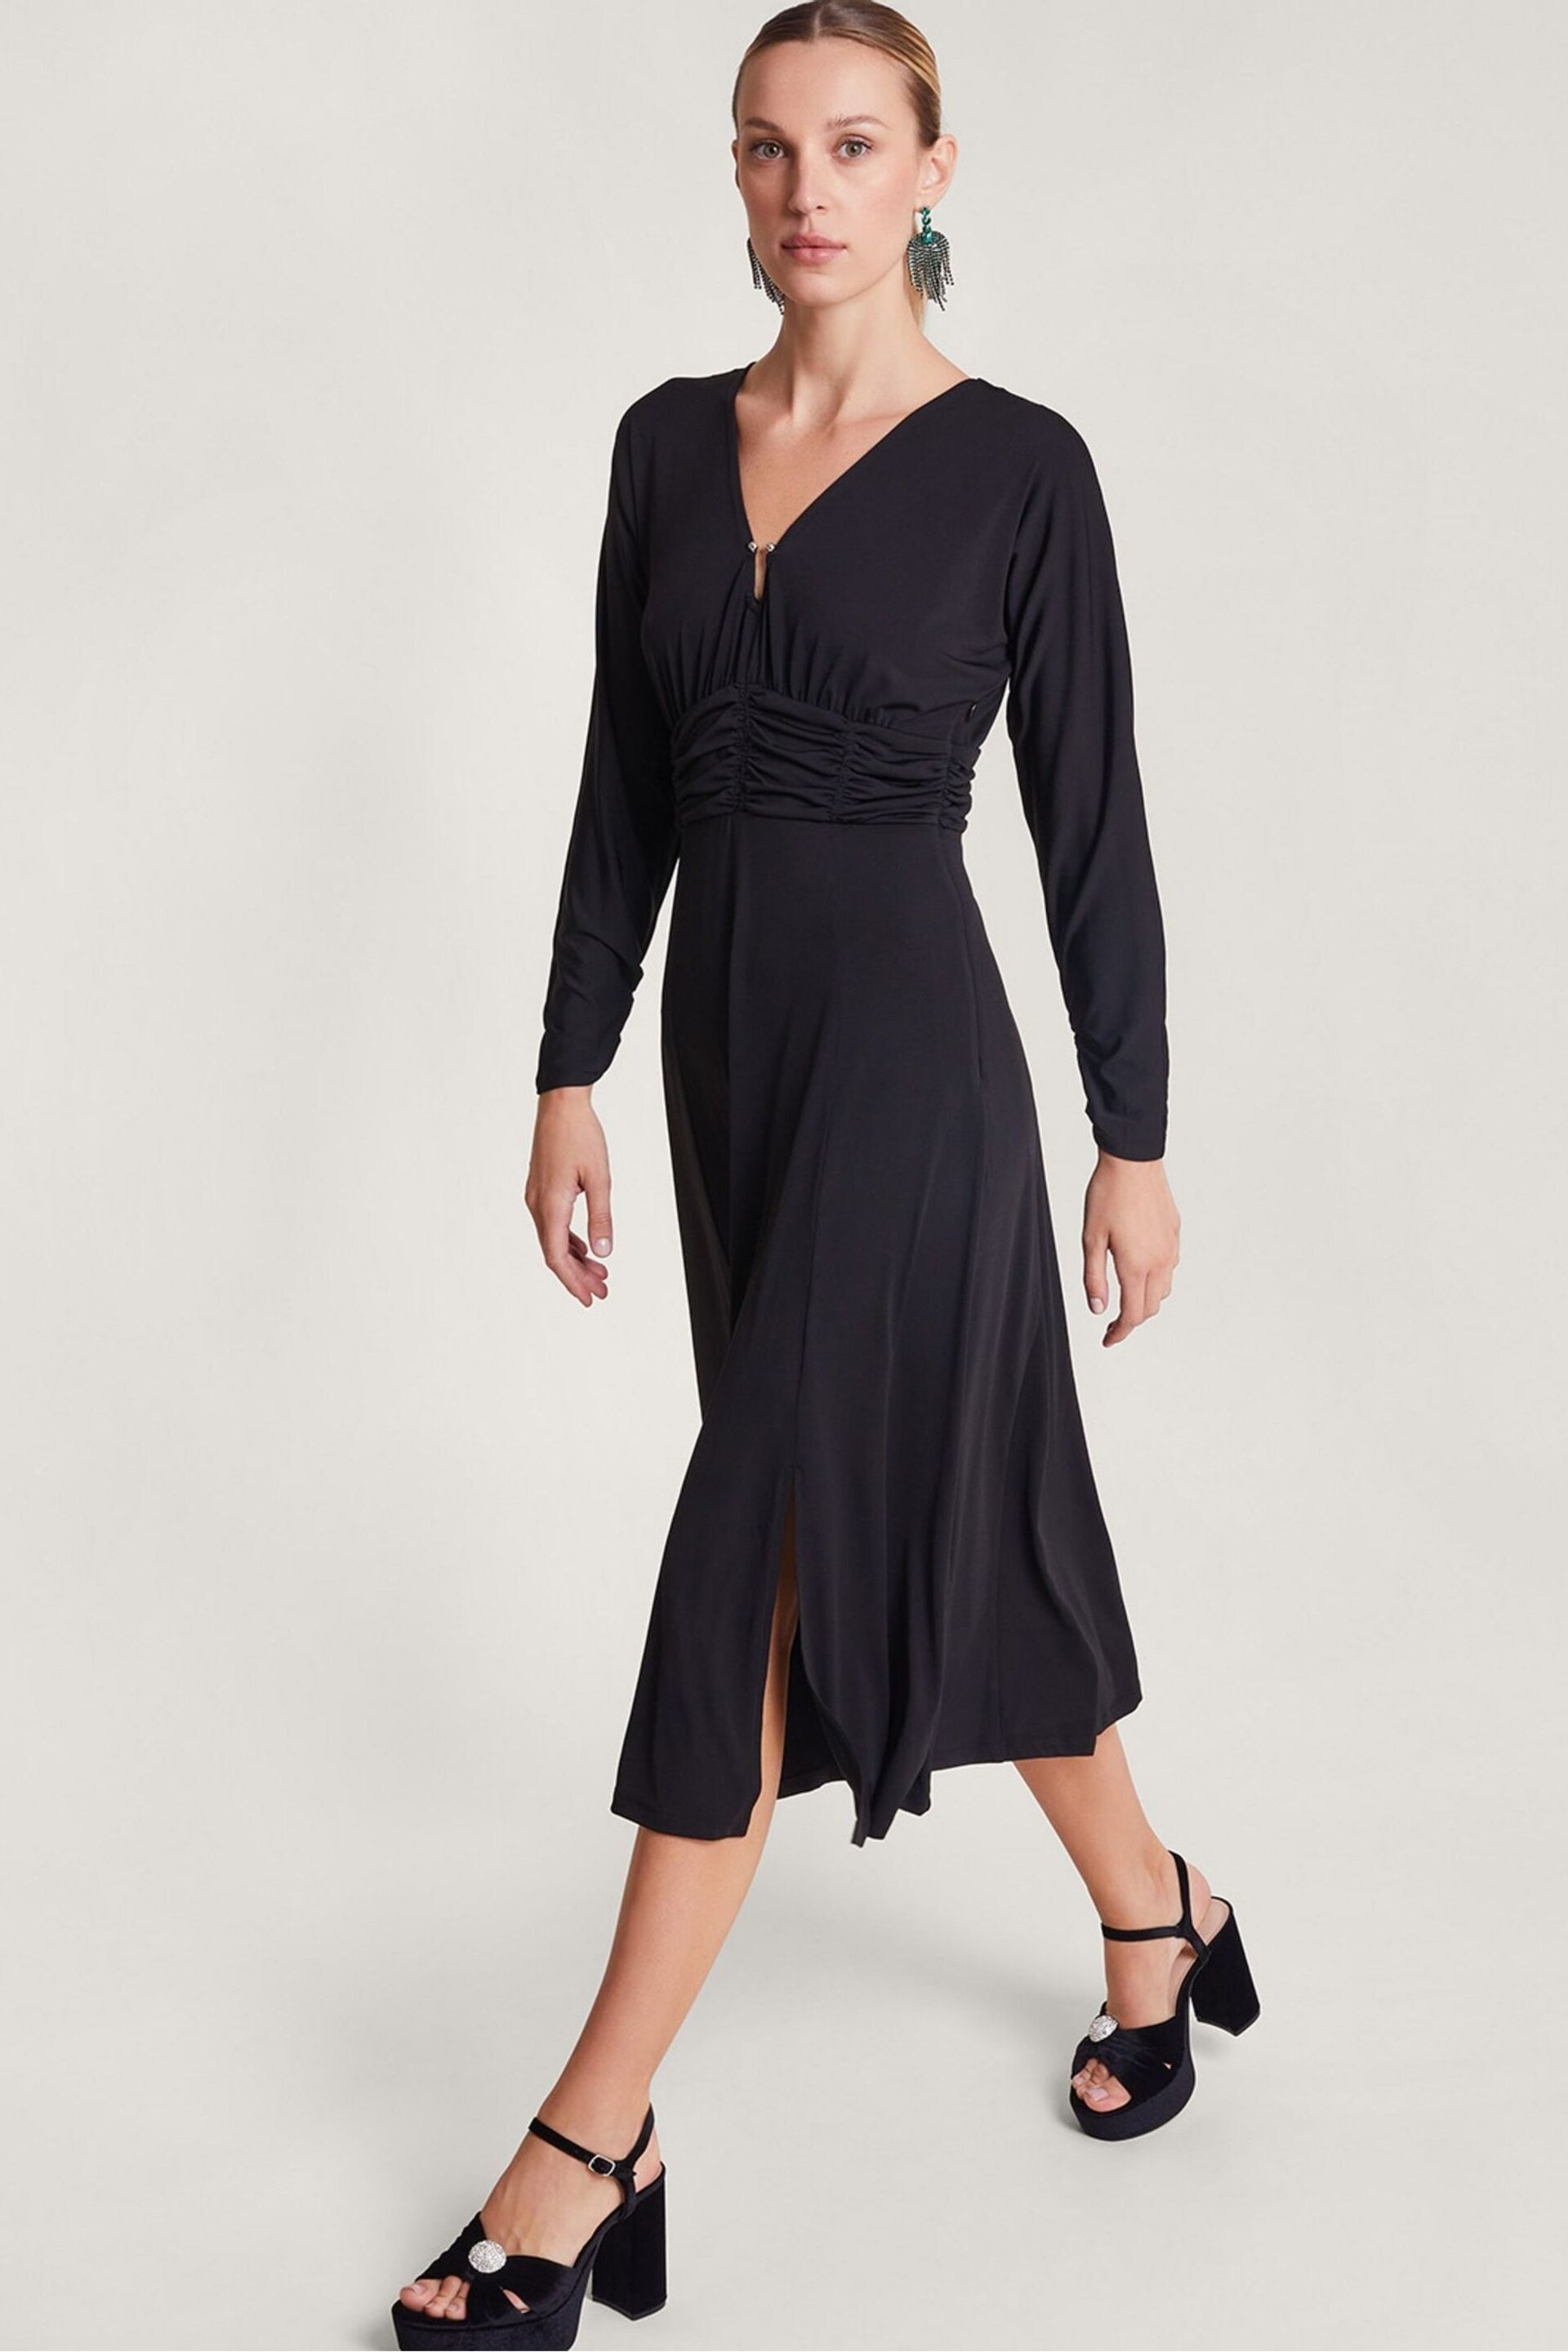 Monsoon Black Ruched Ray Dress - Image 1 of 4